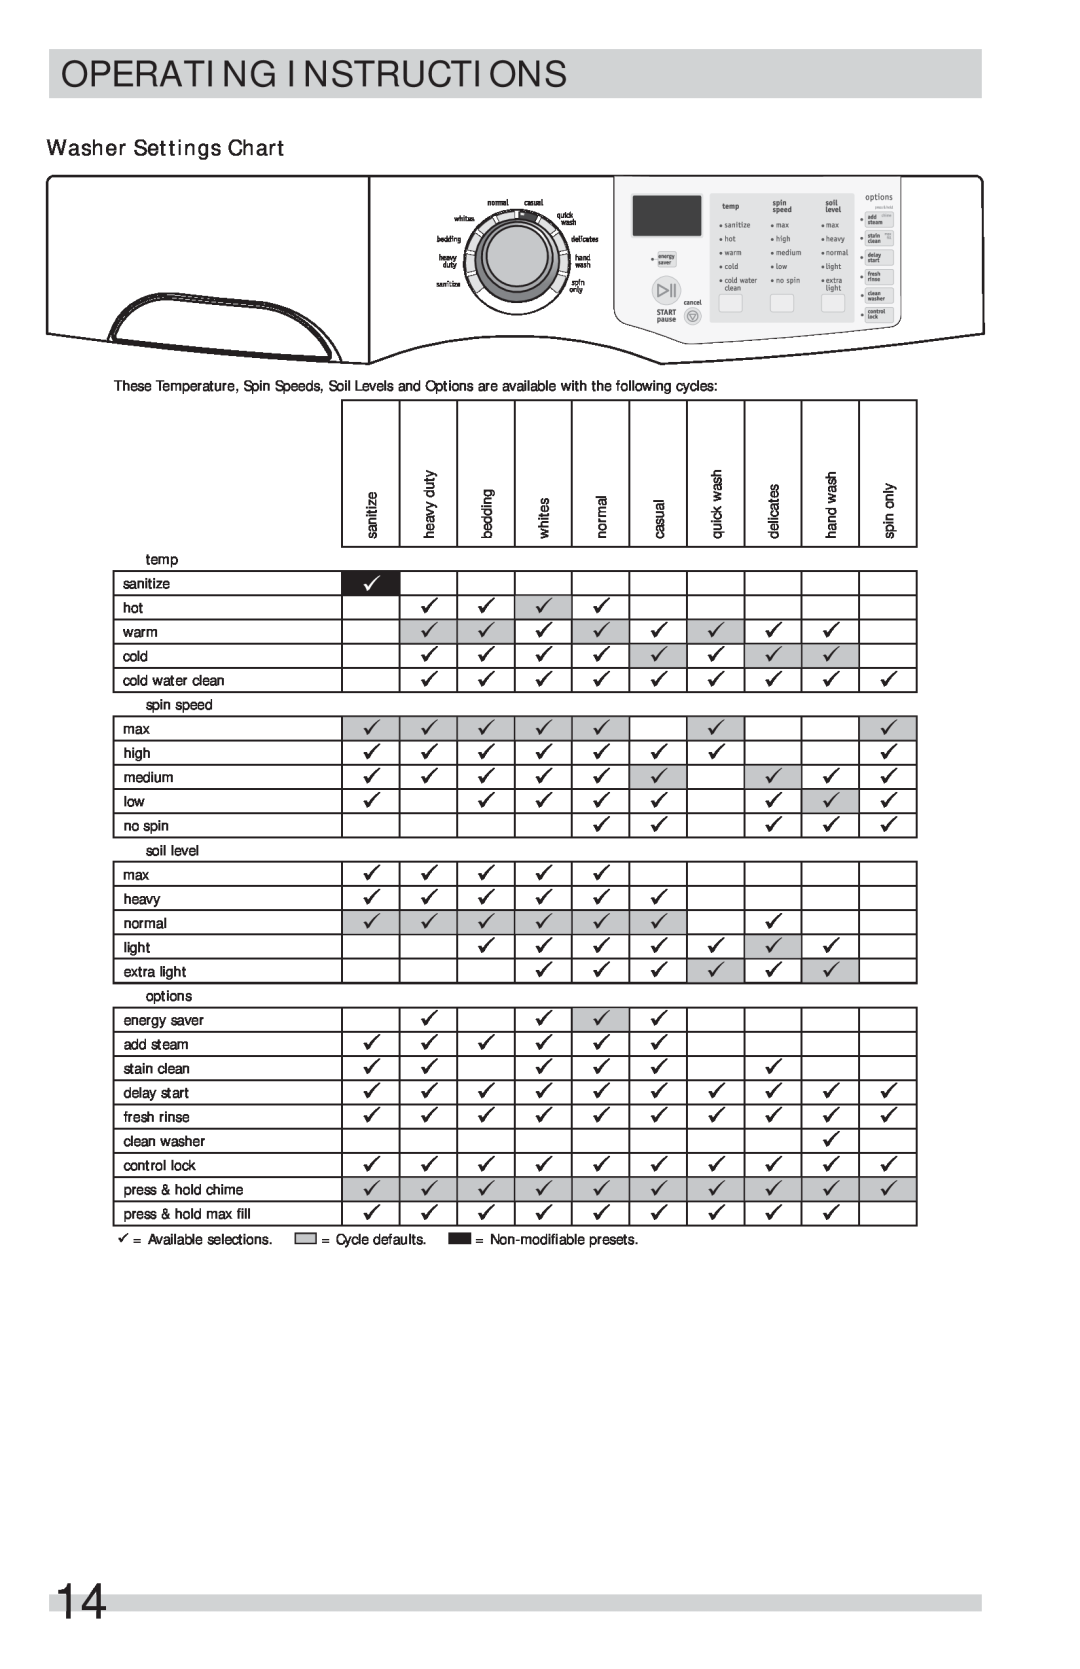 Frigidaire FFFS5115PW, FFFS5115PA Washer Settings Chart, Operating Instructions, = Non-modiﬁable presets 